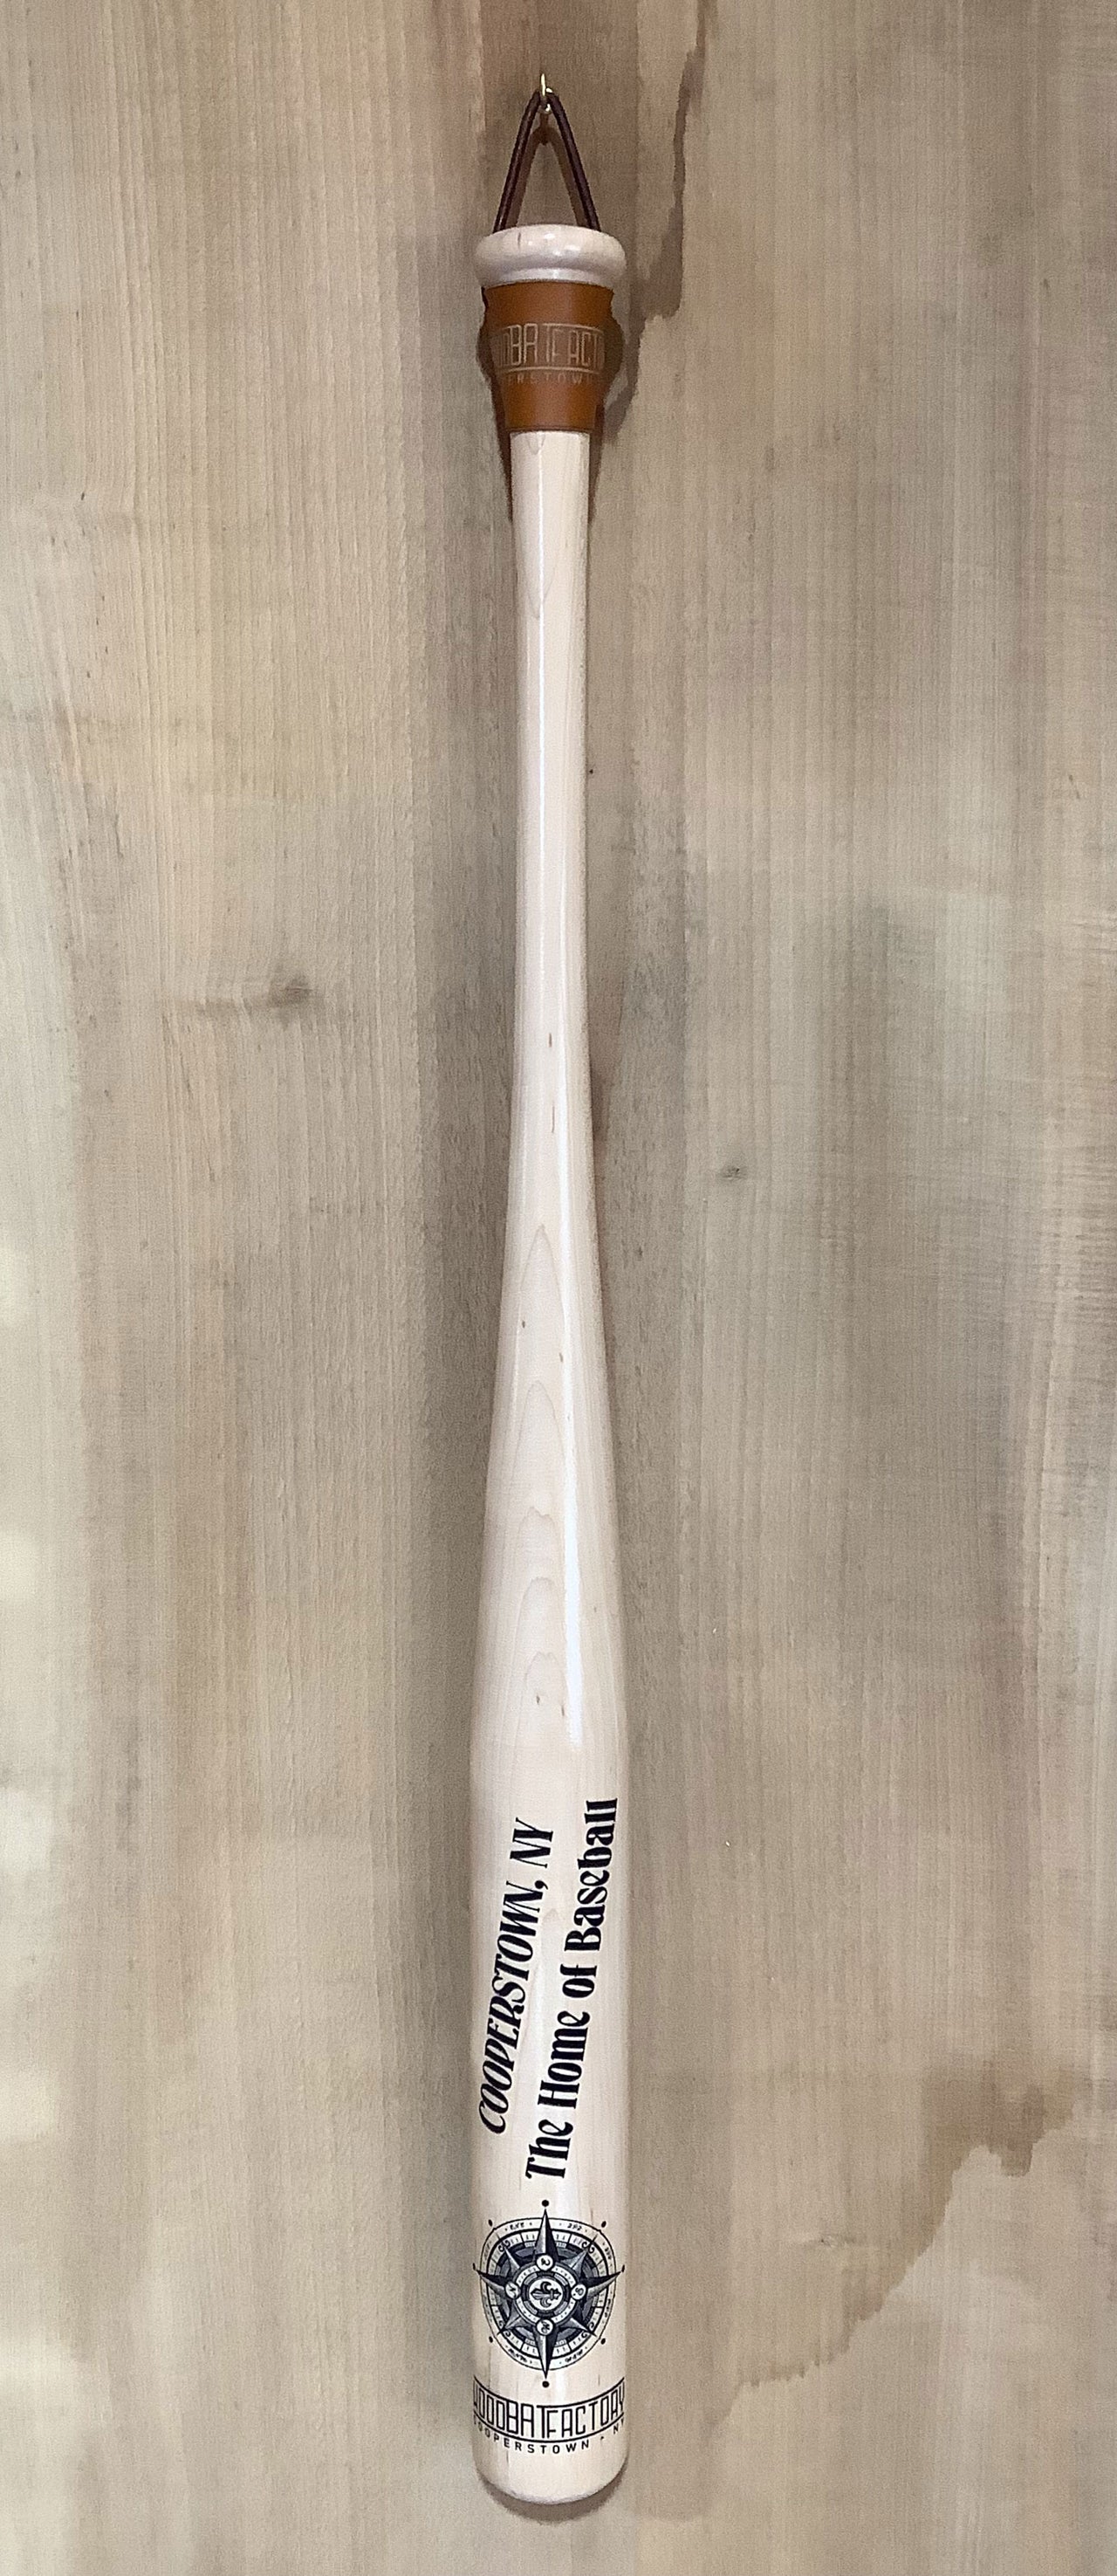 Custom Engraved & Hand Painted Wood Trophy Bat "Cooperstown, NY The Home Of Baseball"